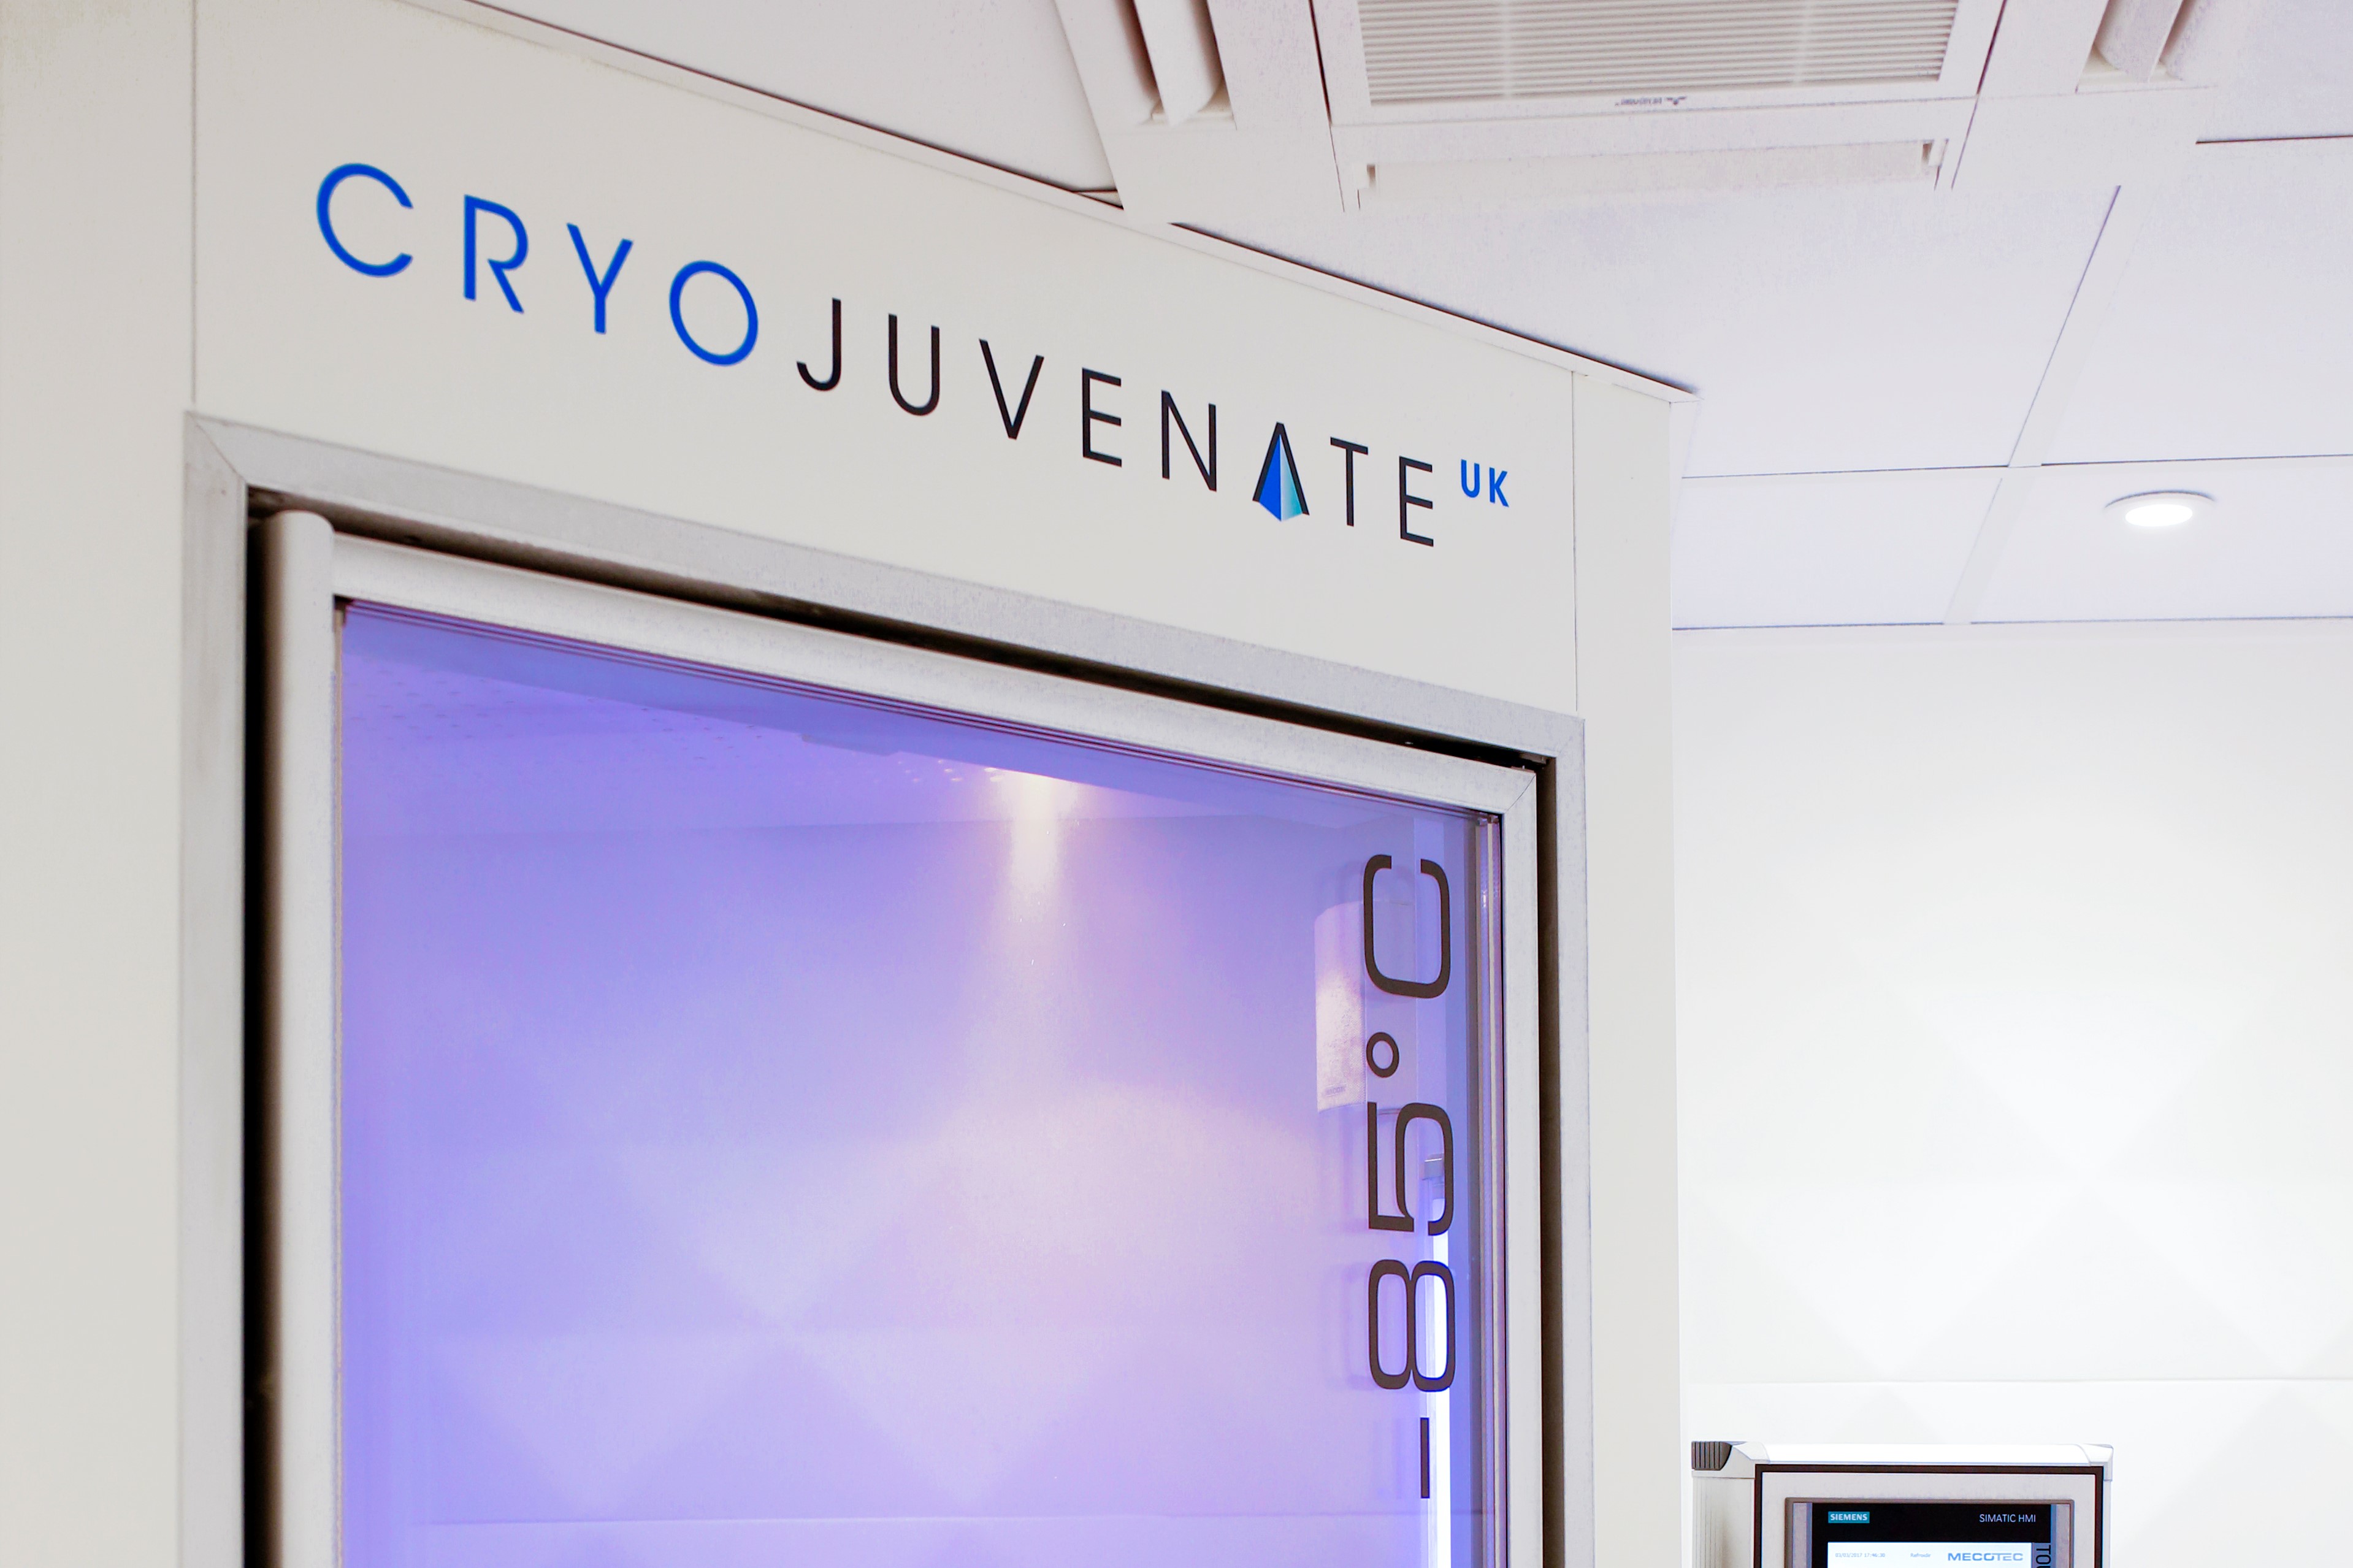 the outside of the cryochamber at Cryojuvenate